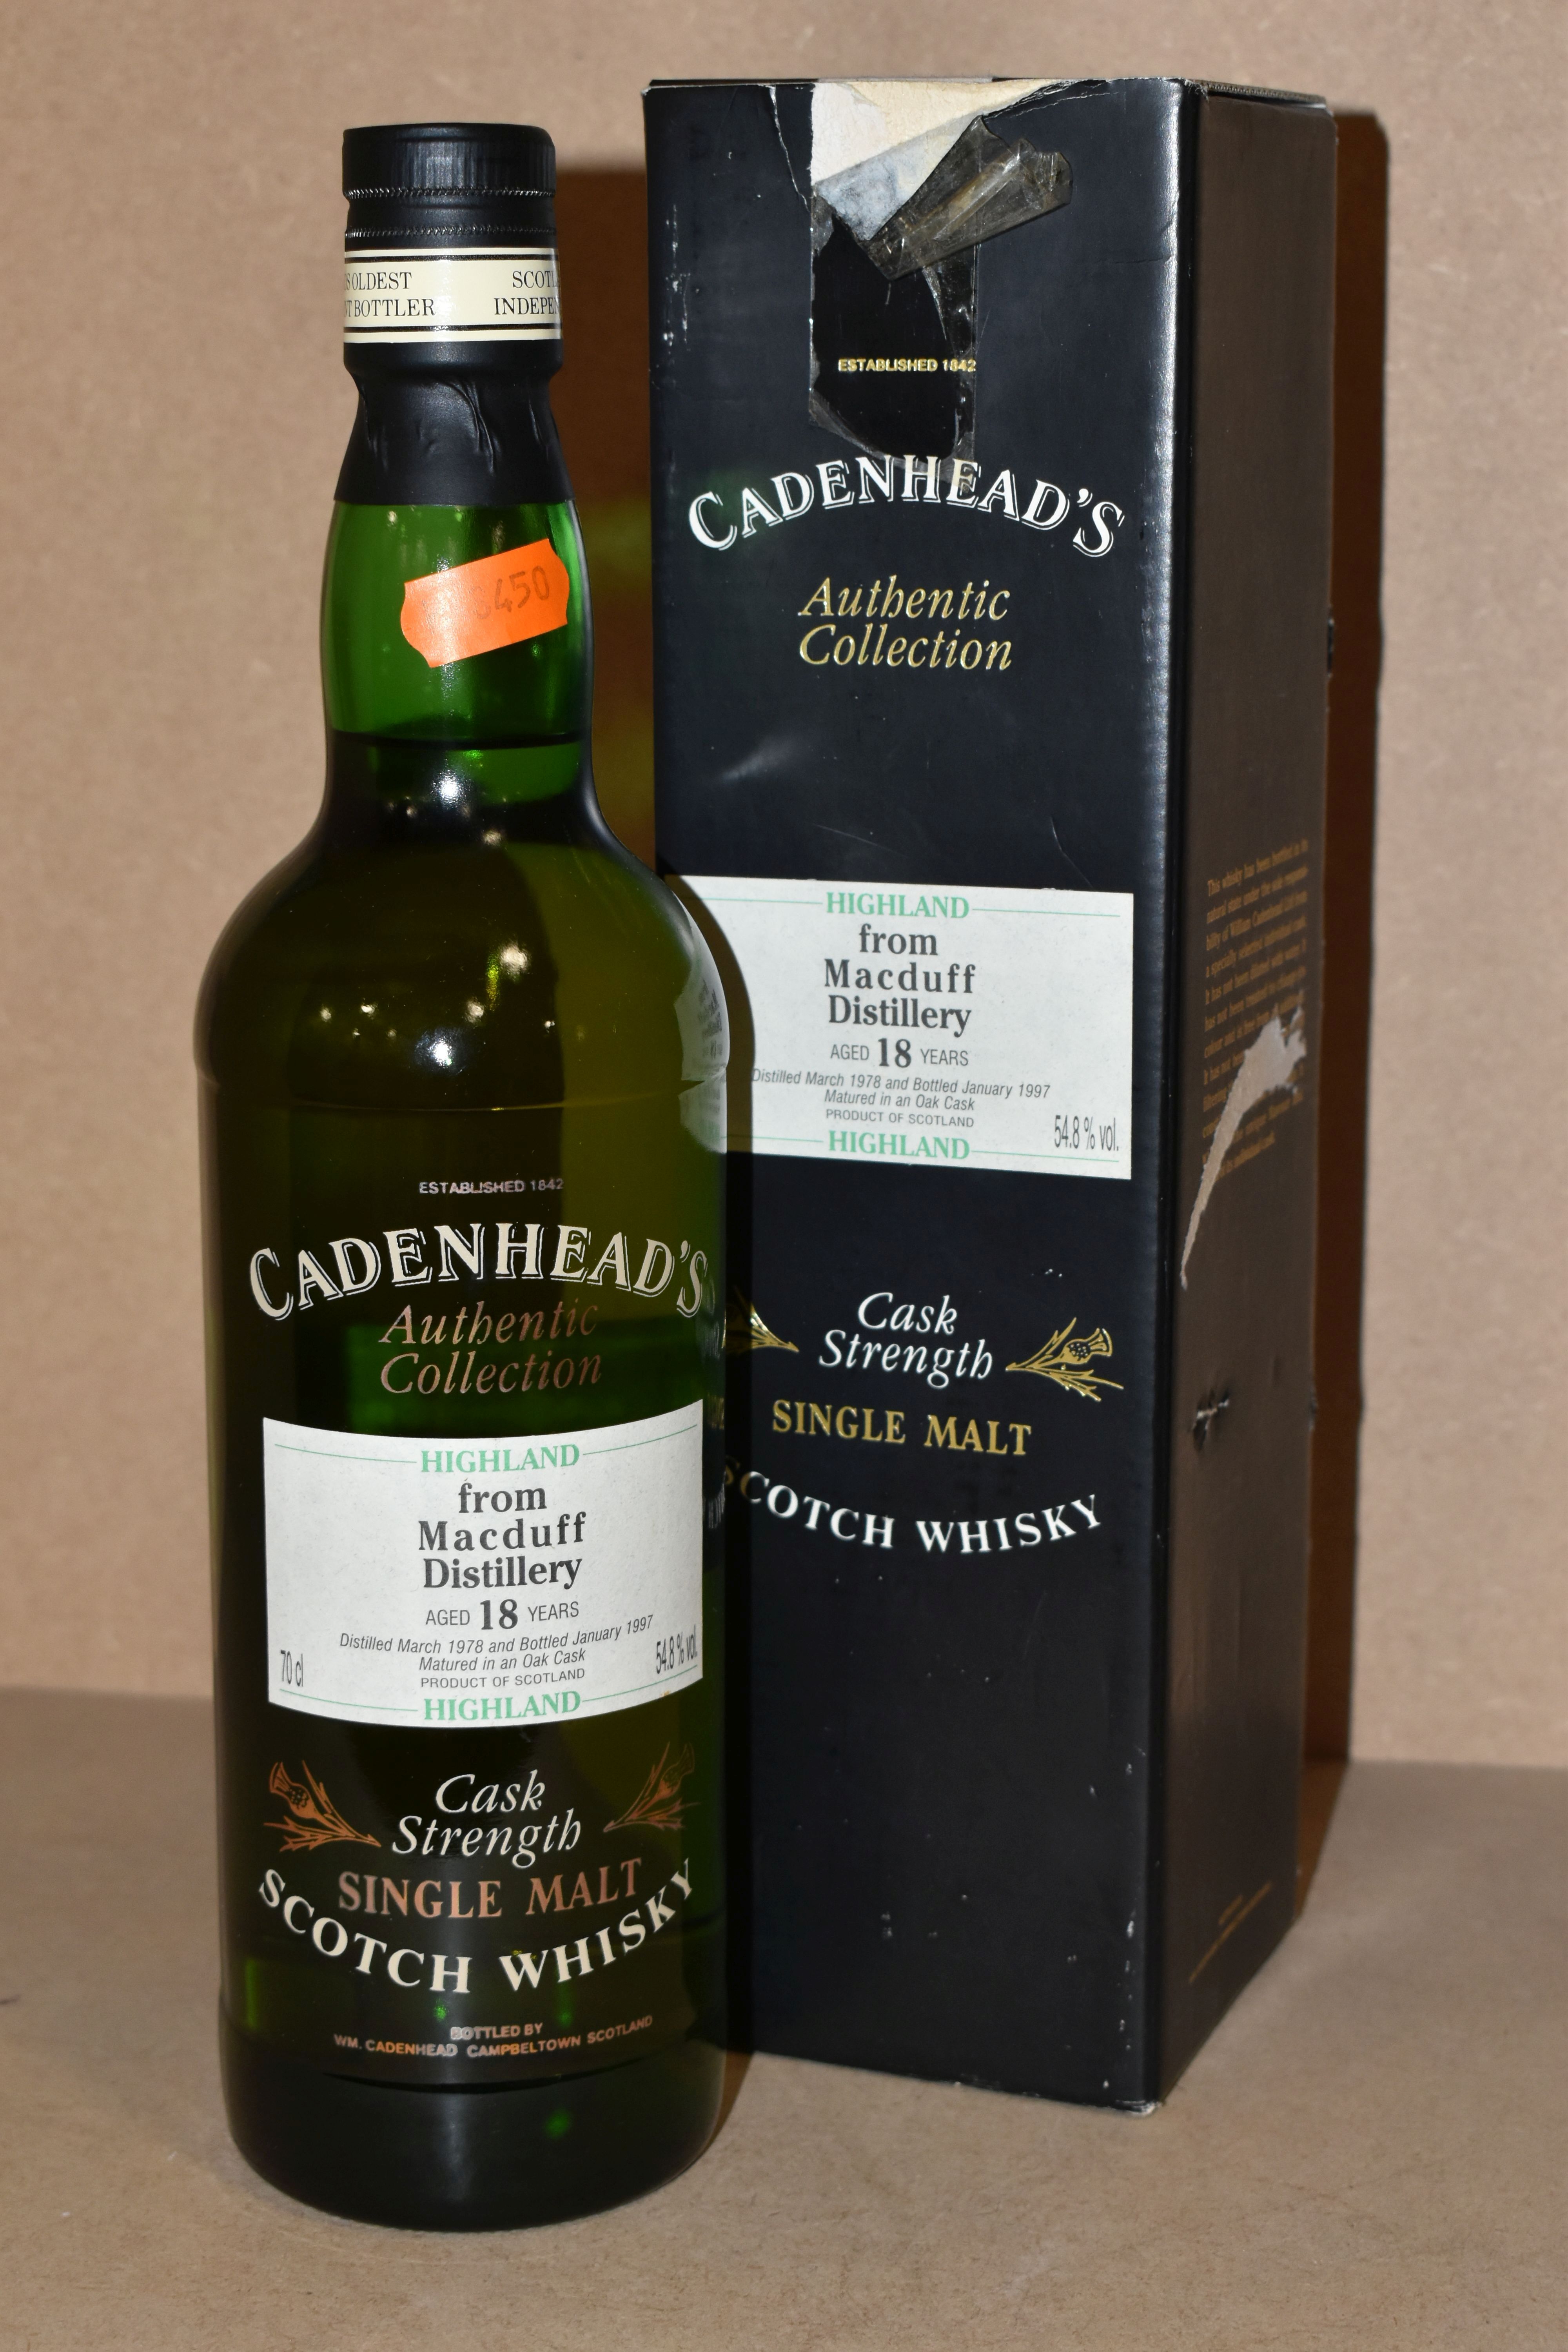 SINGLE MALT, One Bottle from Cadenhead's Authentic Collection from The MACDUFF DISTILLERY, aged 18